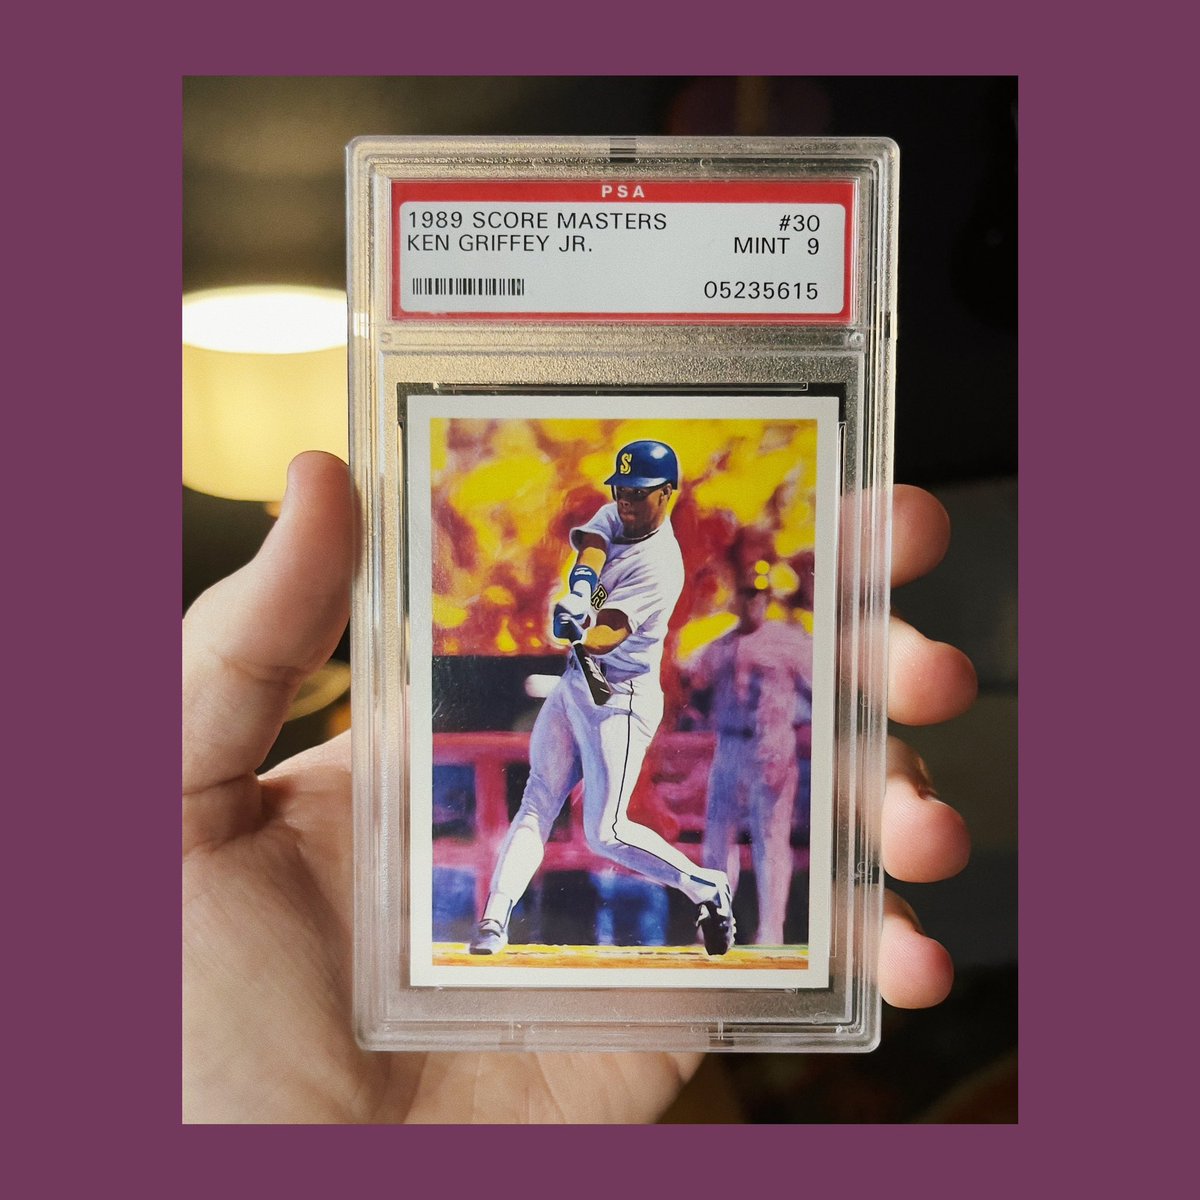 Let’s see your #Cardoftheday! Mine is this one of The Kid - these cards are so underrated. #thehobby @CardPurchaser